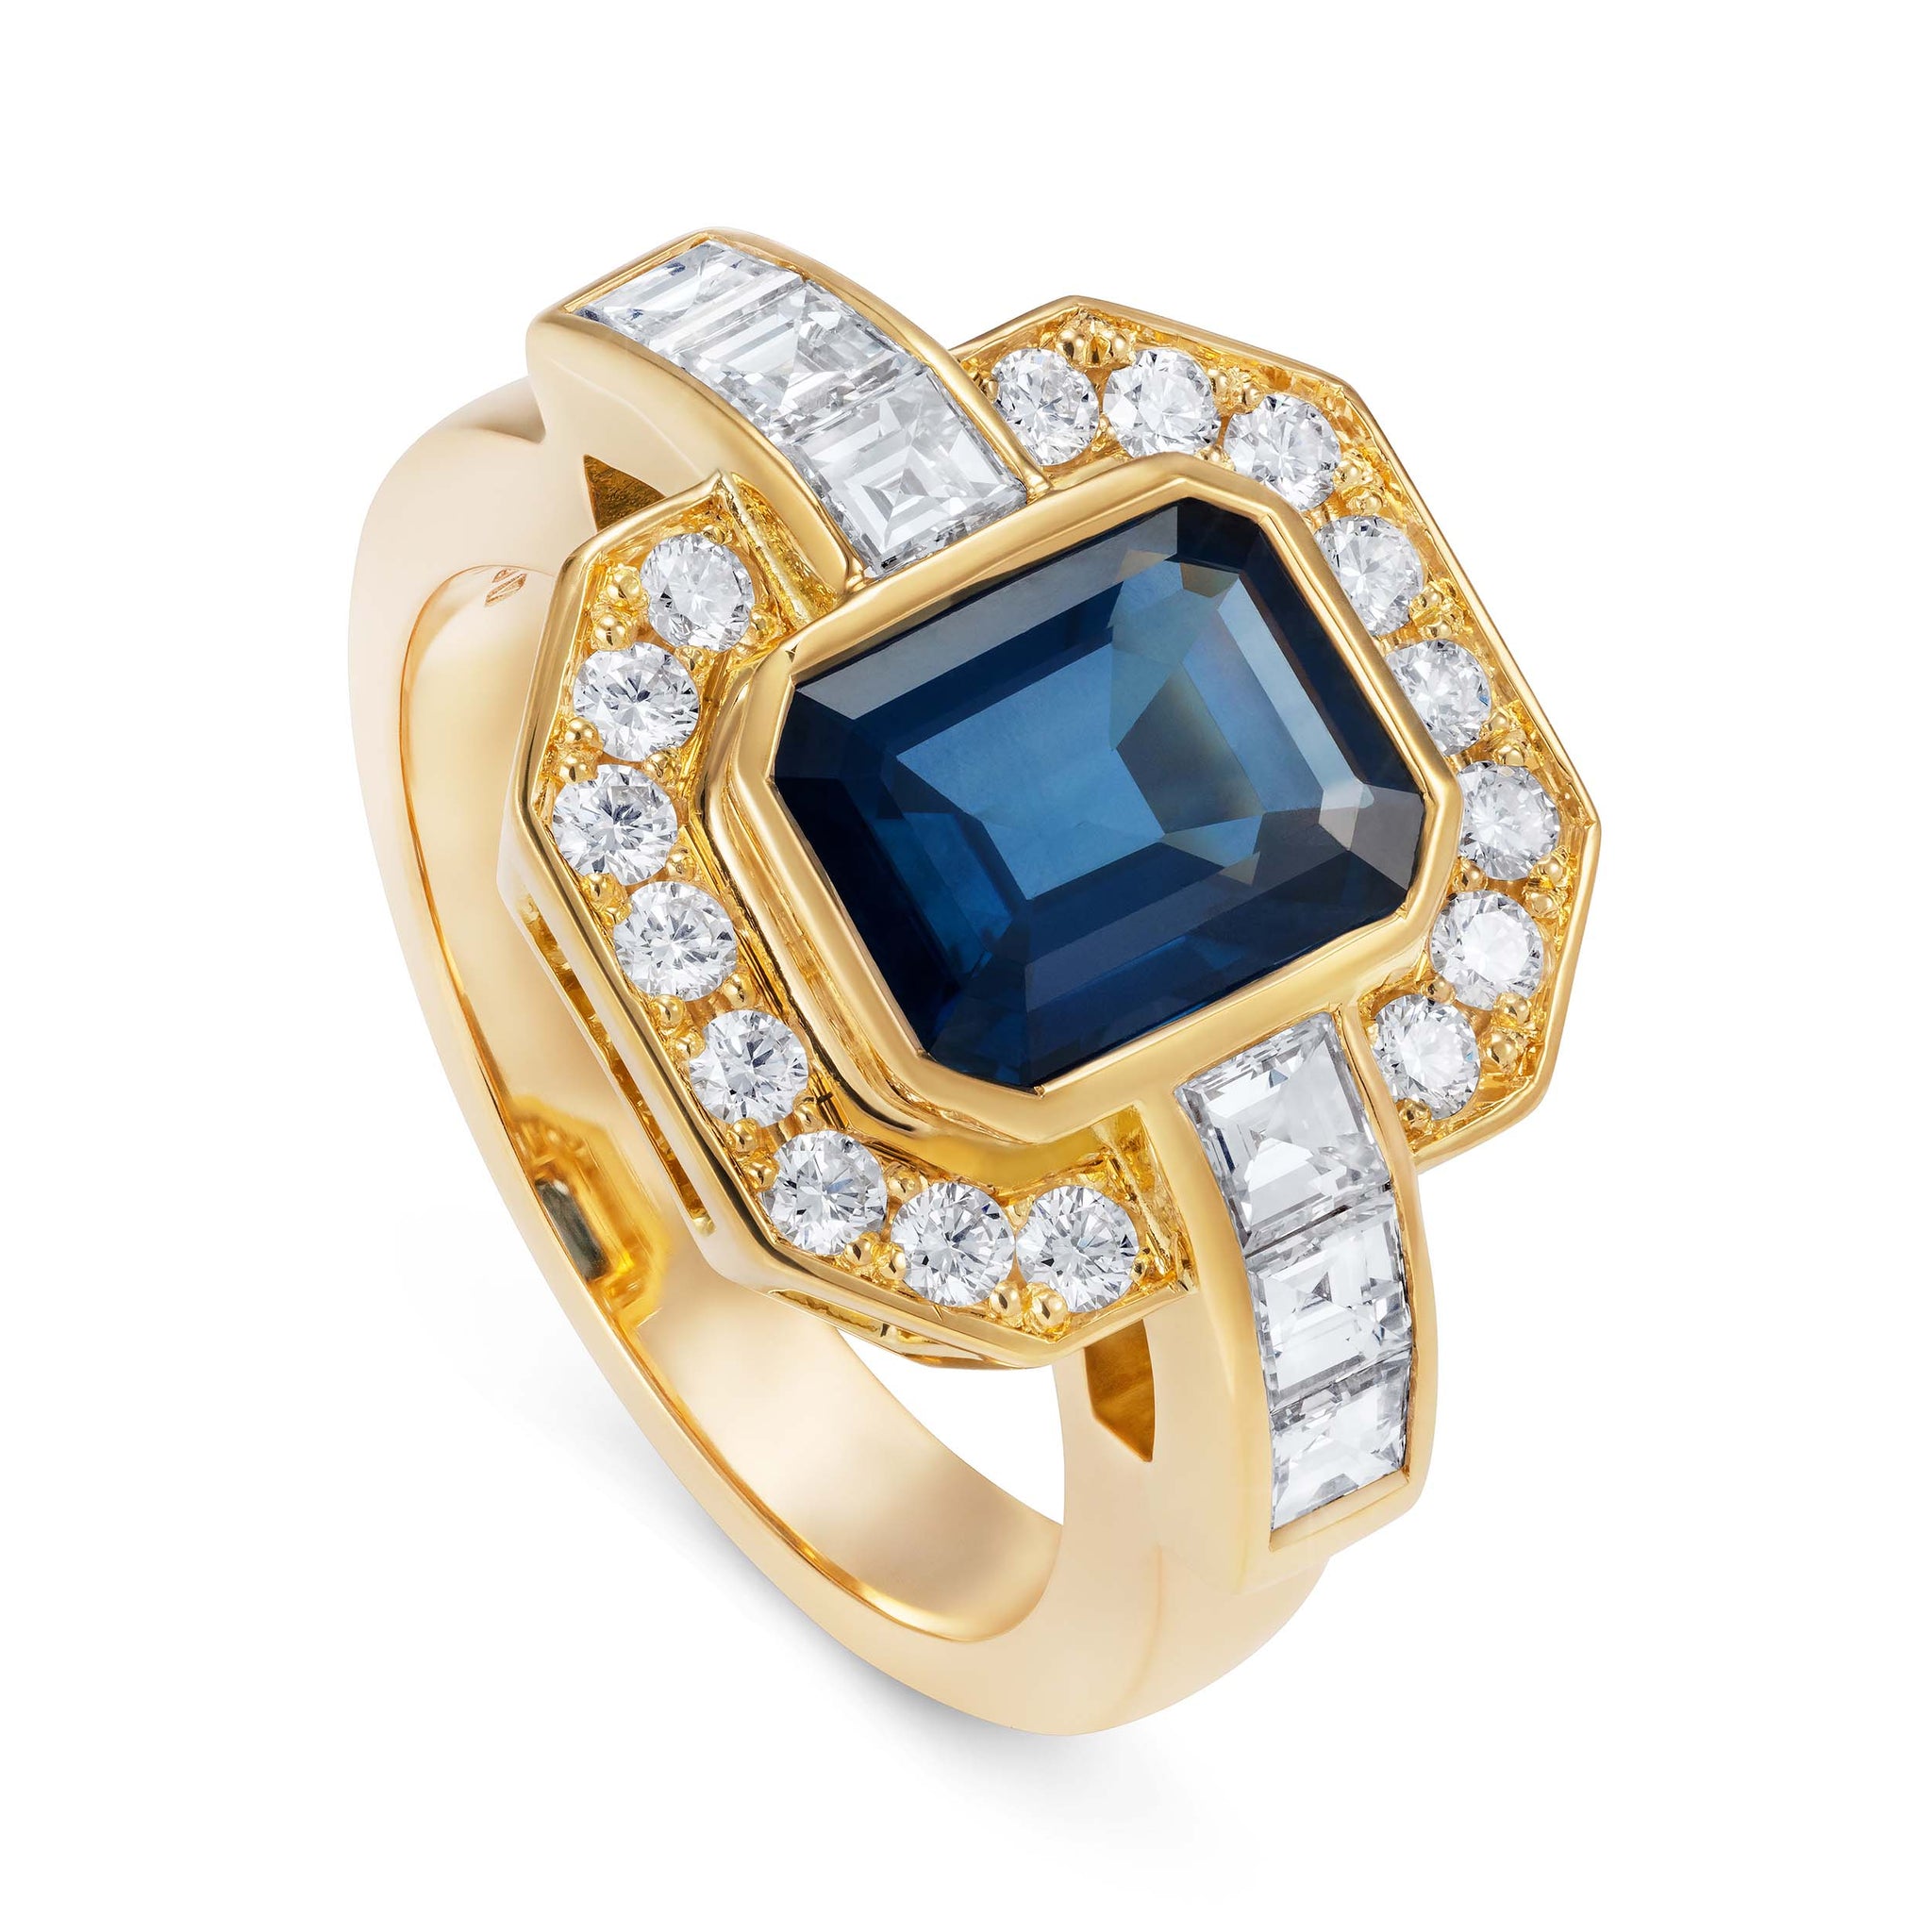 Art Deco Sapphire Engagement Ring by Yasmin Everley